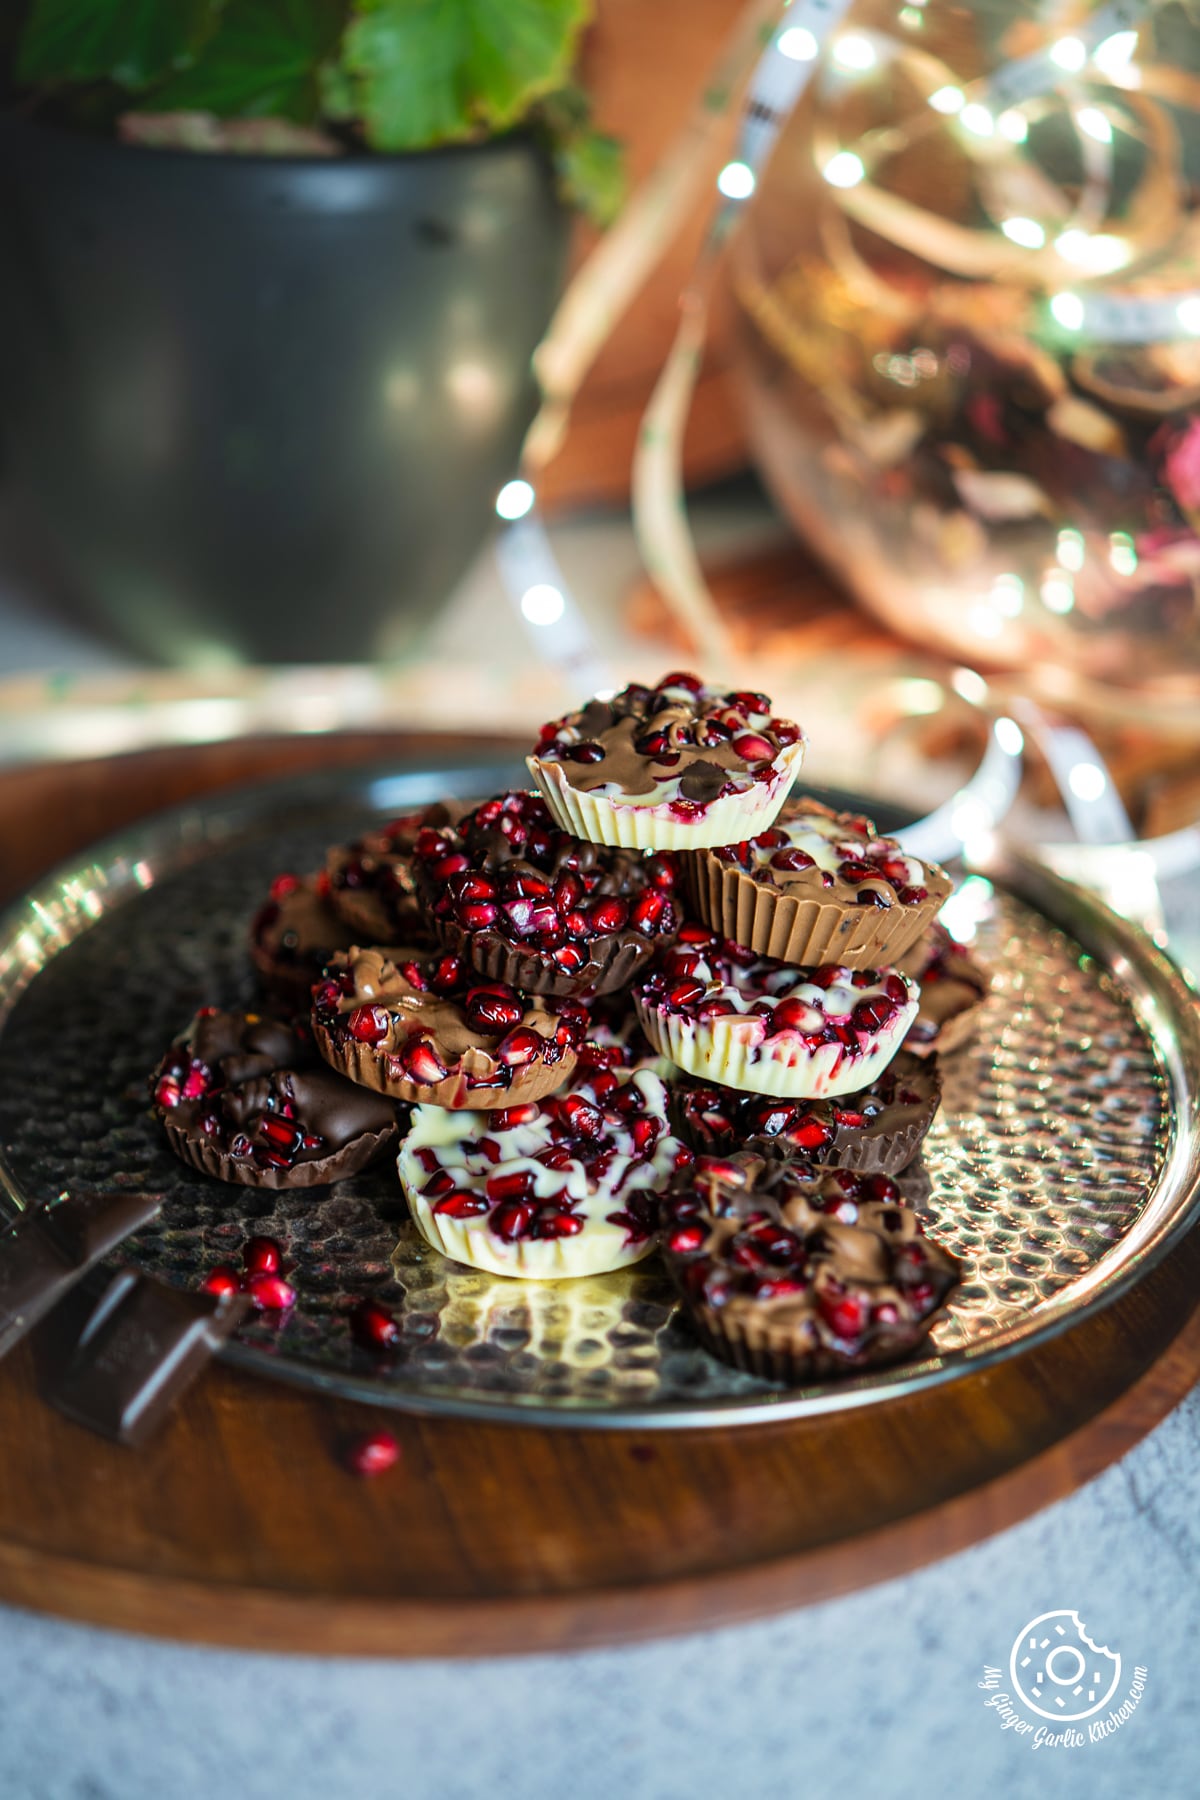 a stack of assorted chocolate pomegranate bites on a metal plate with some lights in the background